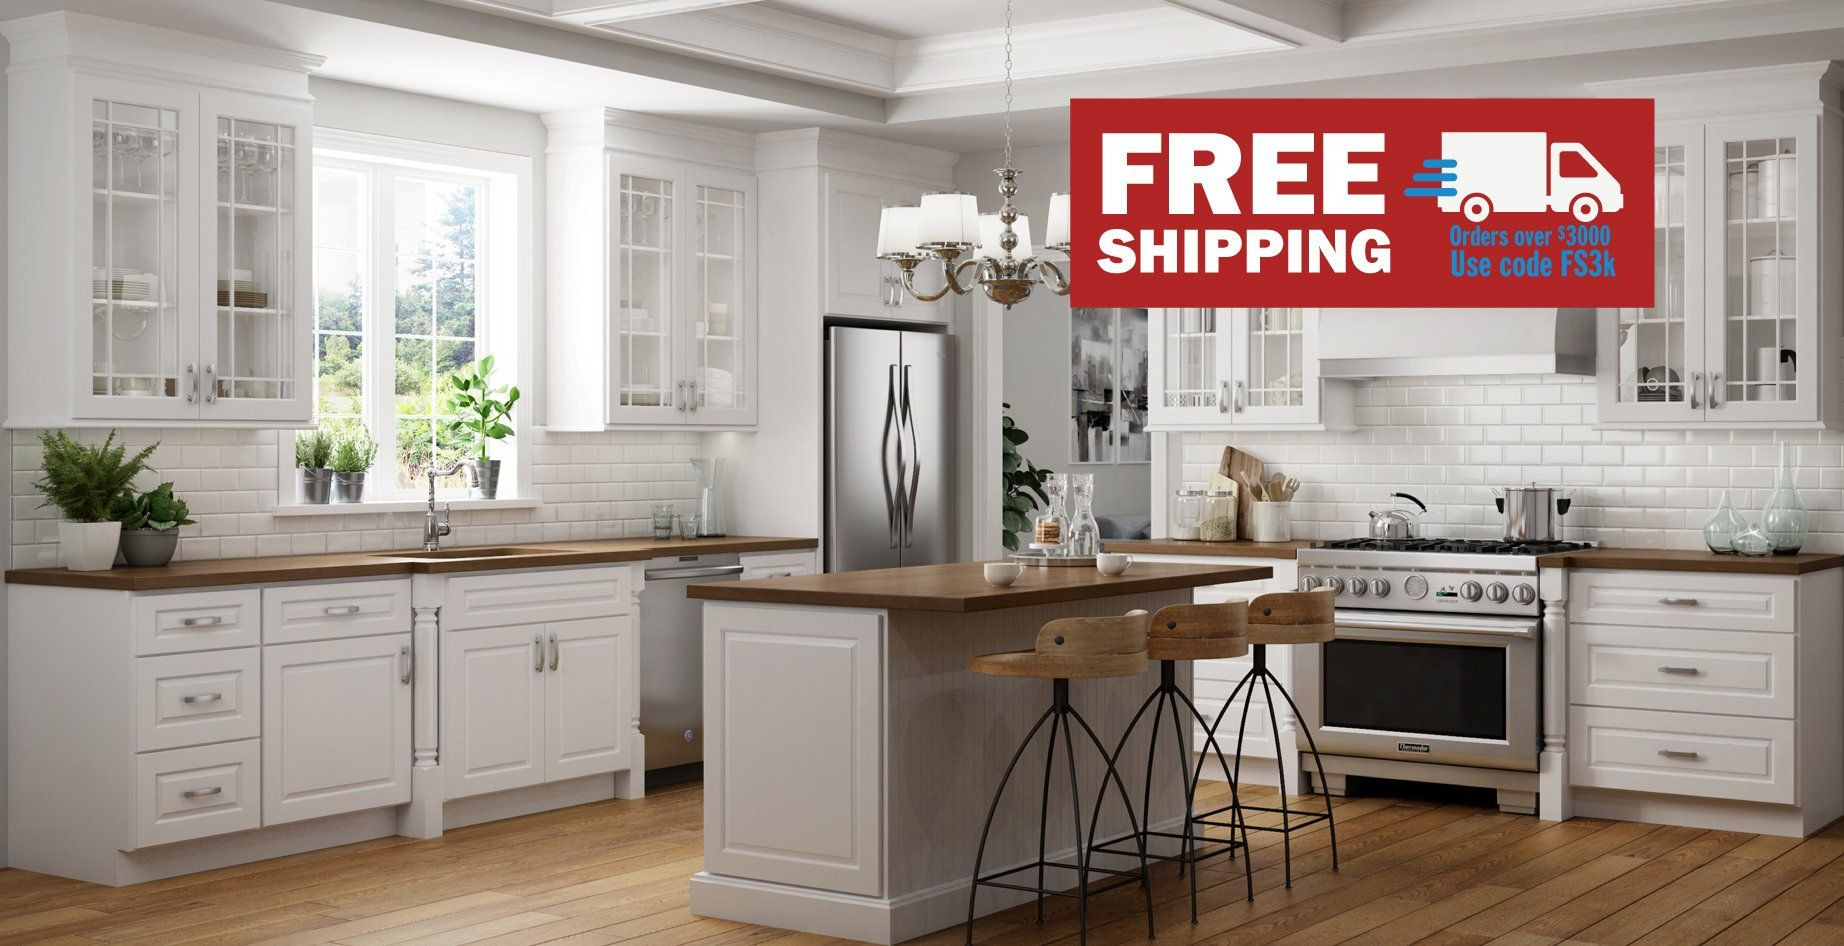 Ready To Assemble Kitchen Cabinets
 RTA Wood Cabinets is a large online dealer of RTA Ready to